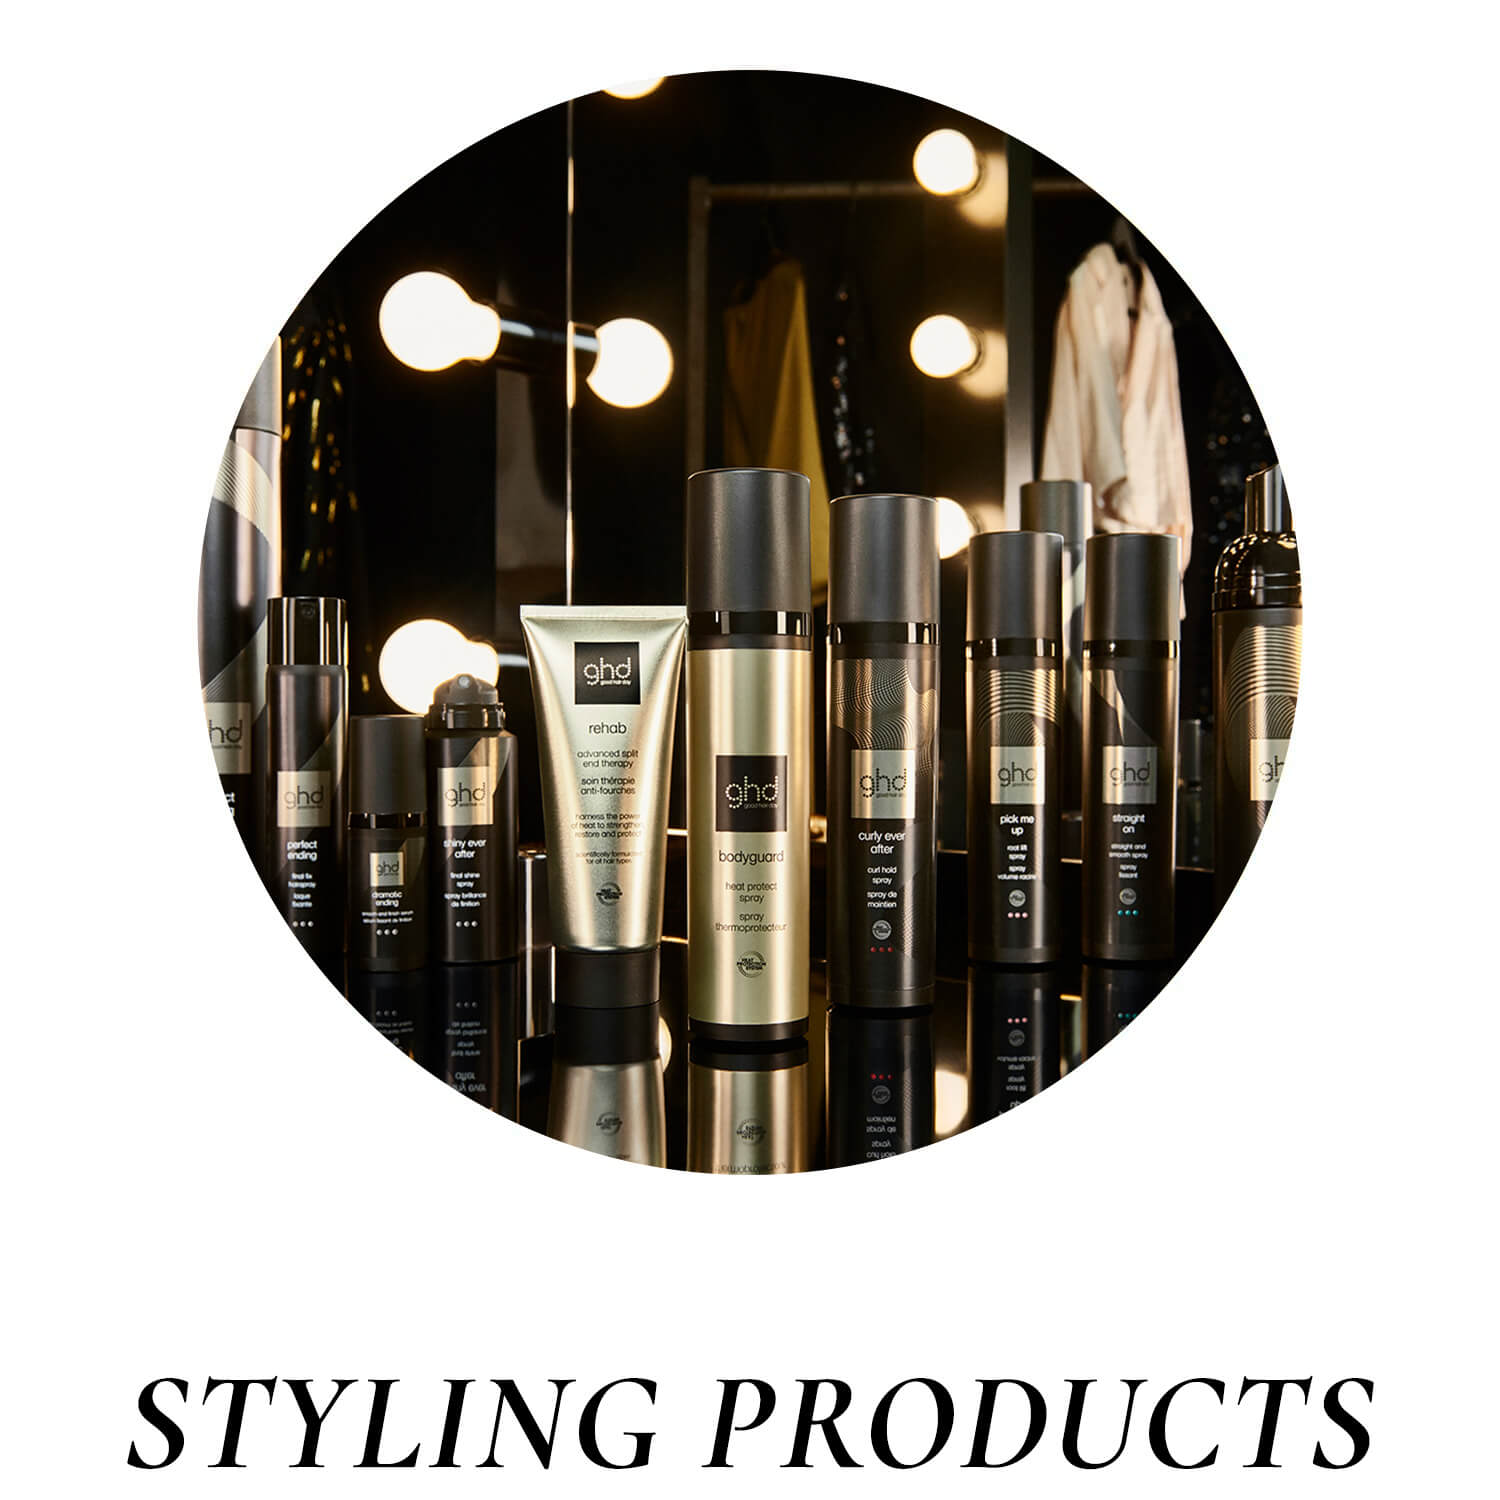 ghd Styling Products